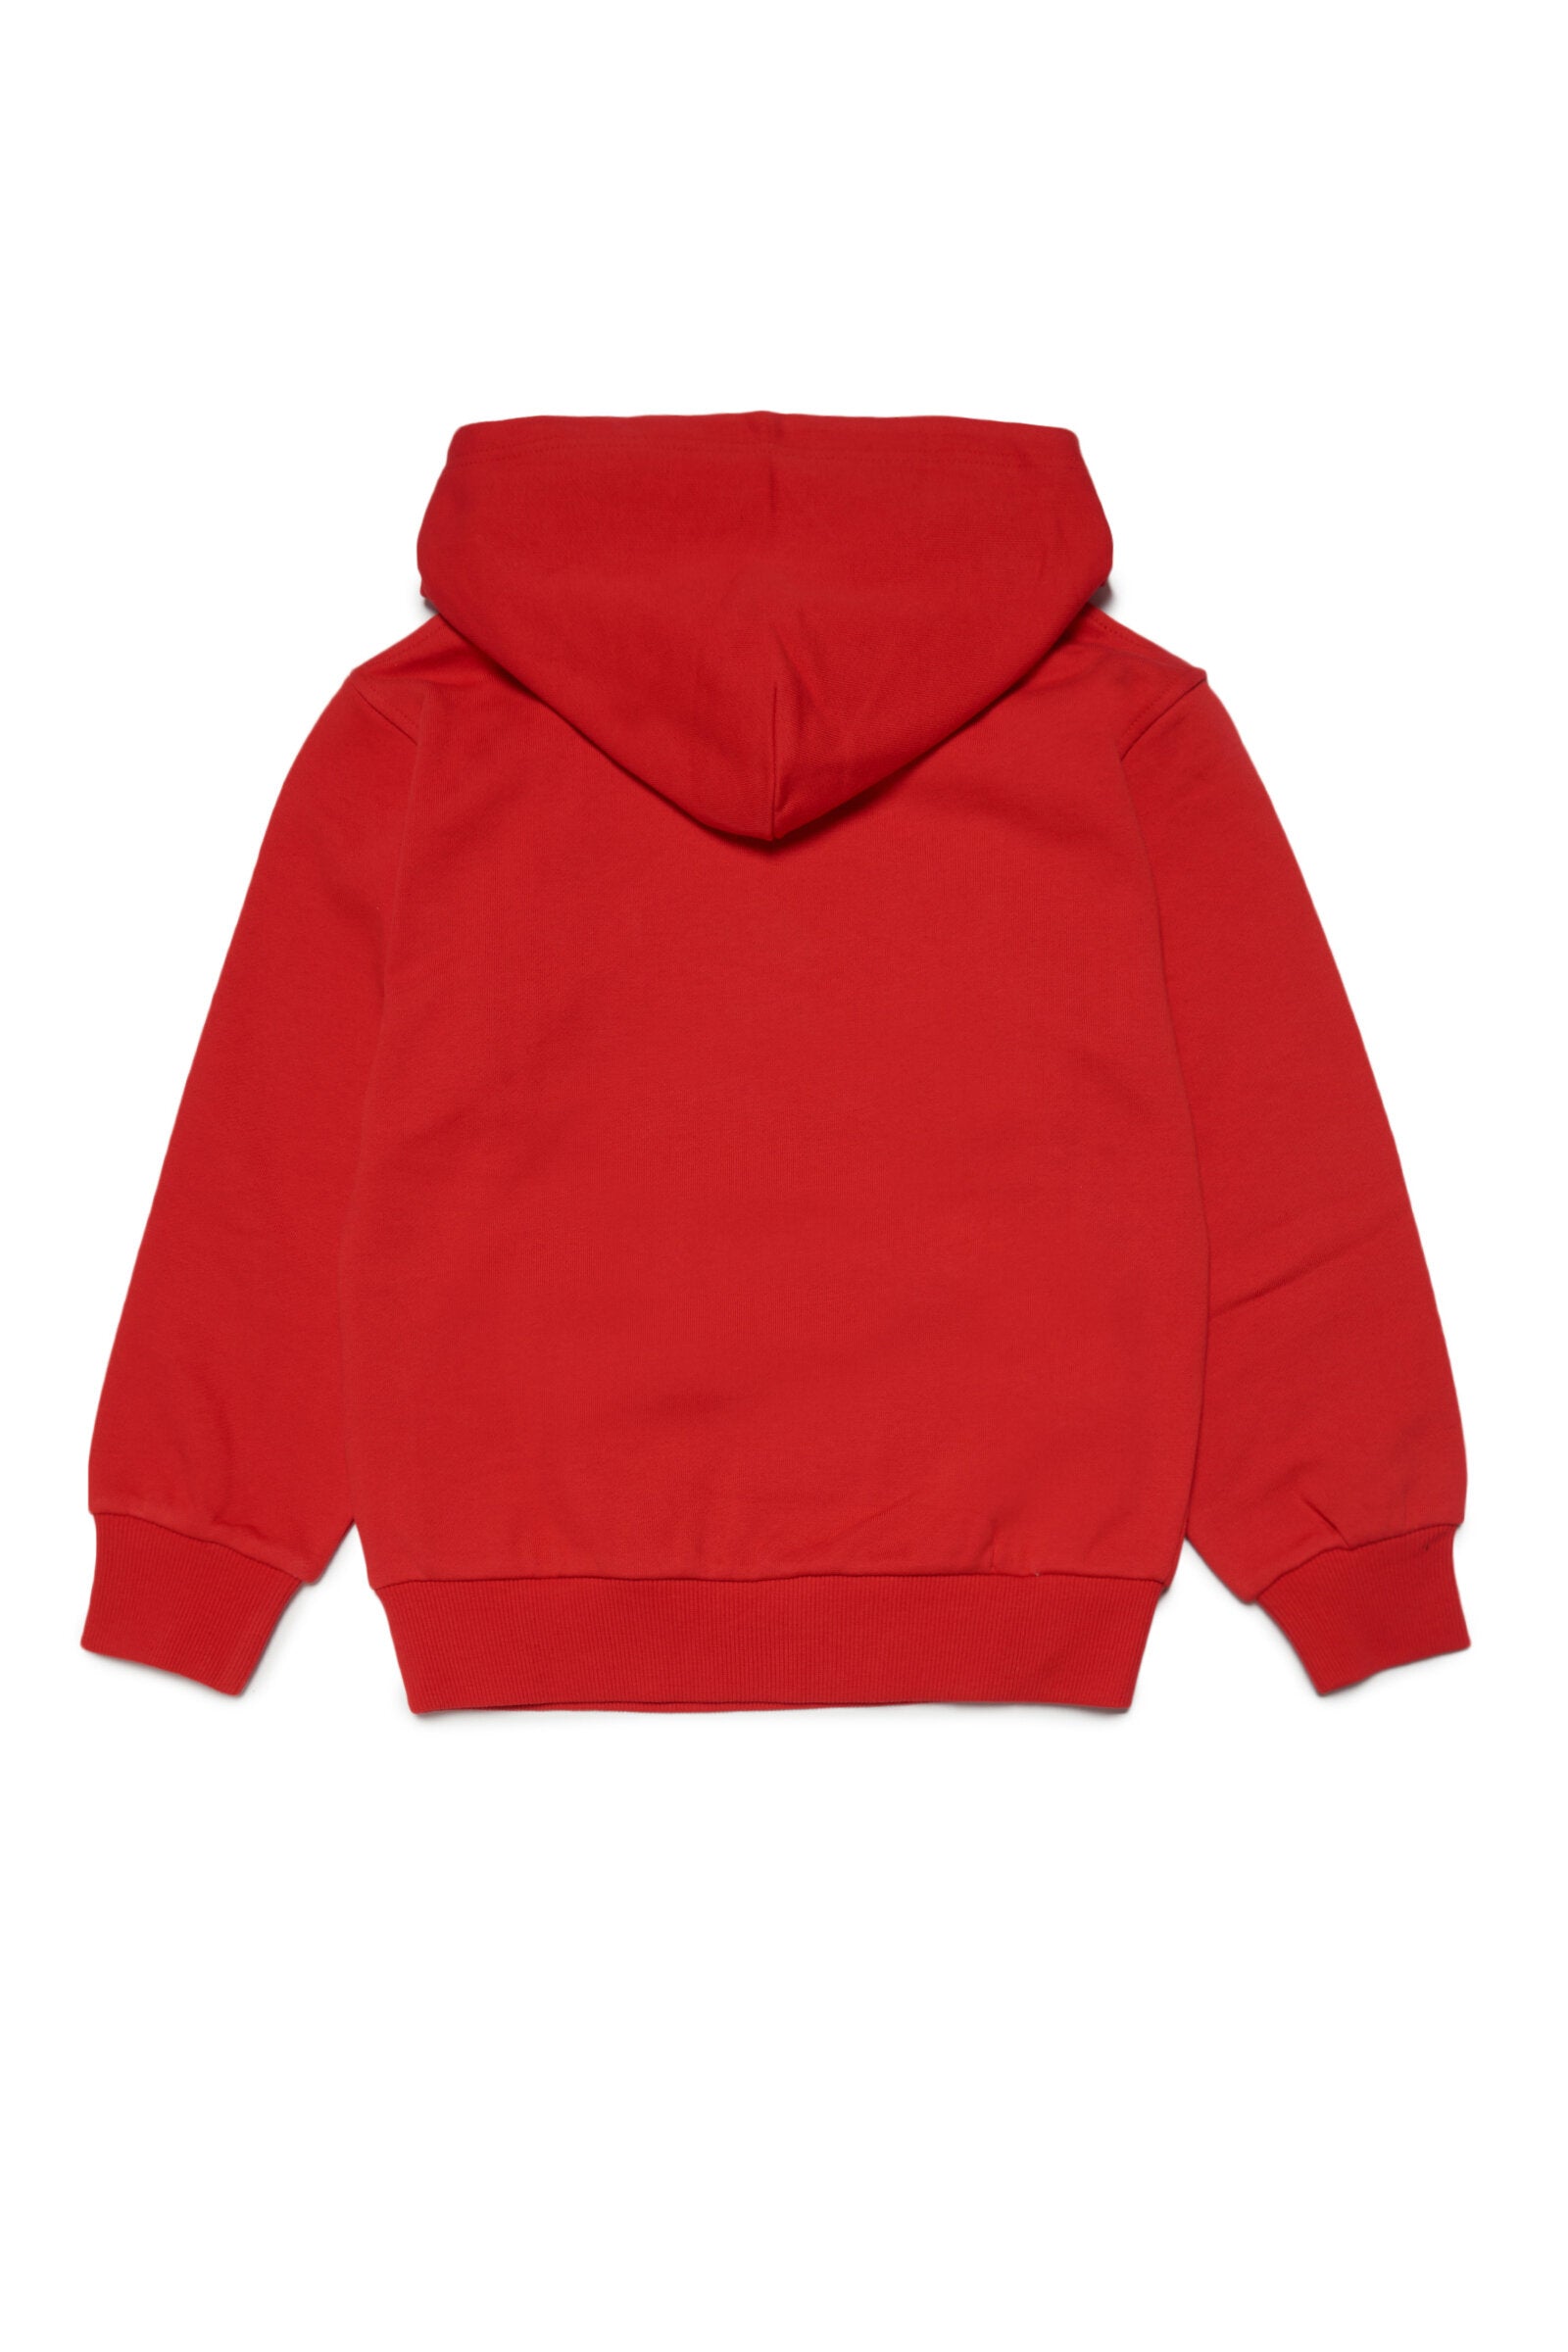 Diesel red hooded sweatshirt with watercolour effect logo for children |  Brave Kid